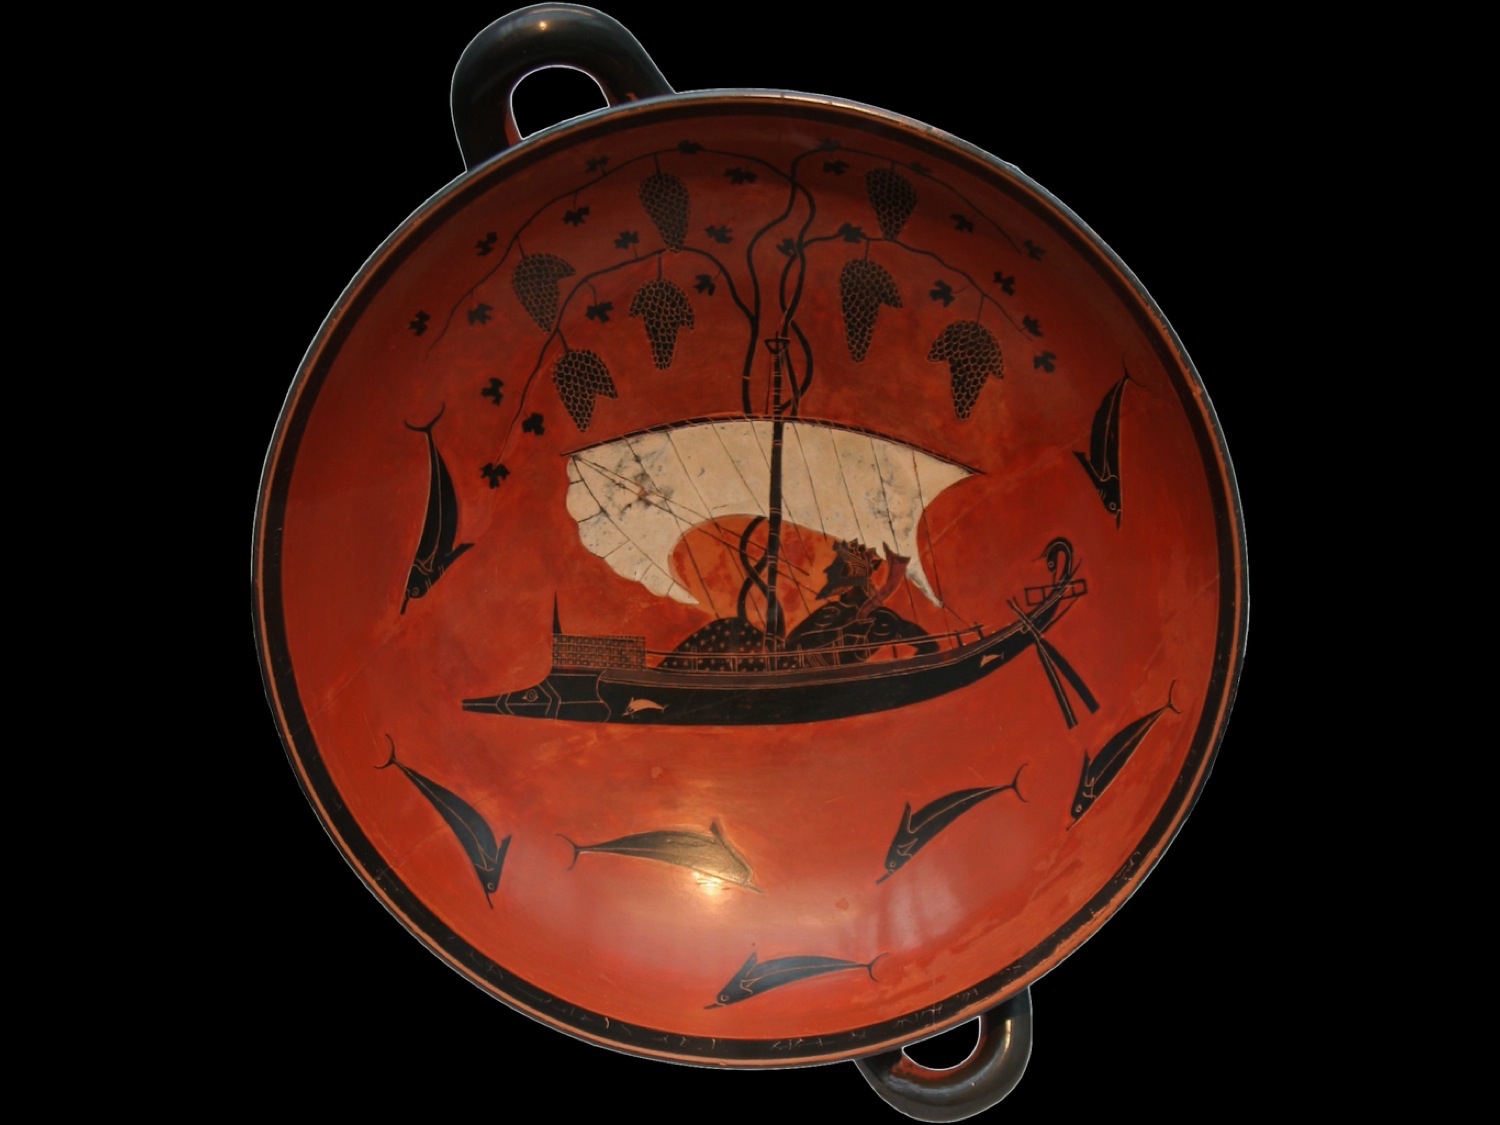 Interior of a black-figure kylix depicting Dionysus on a ship festooned with grapevines sailing among jumping dolphins